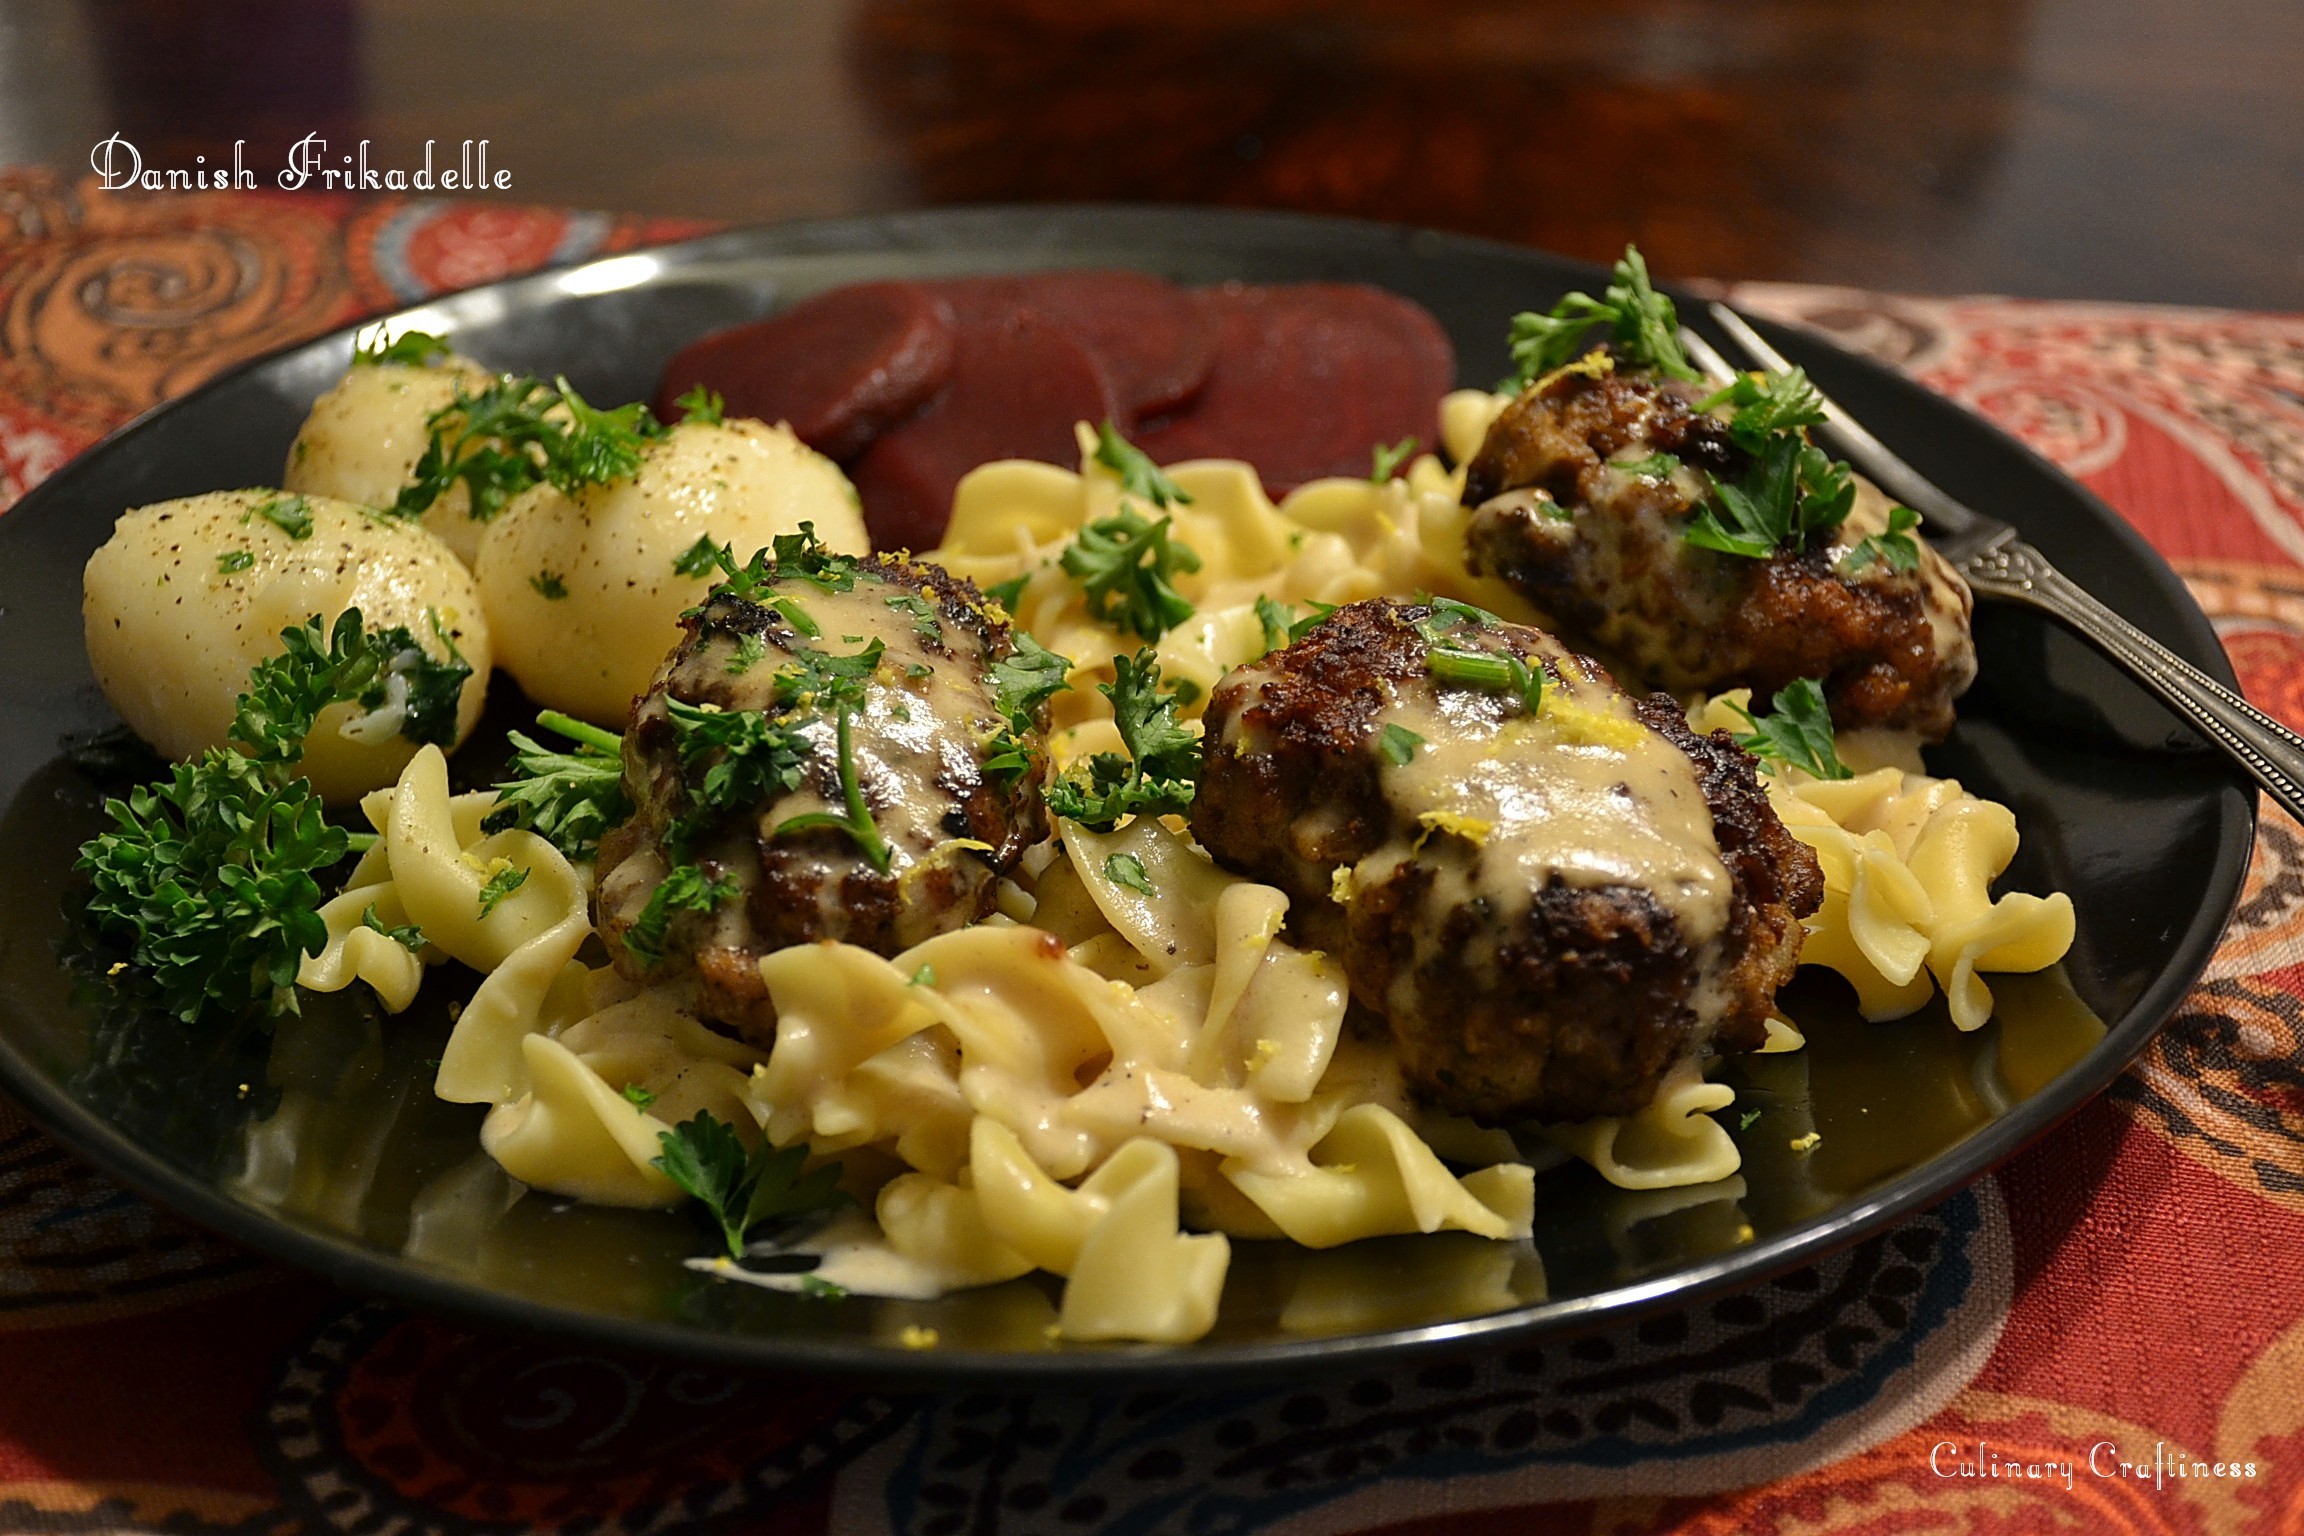 Danish Frikadelle “Meatballs” with Noodles and Gravy – Culinary Craftiness